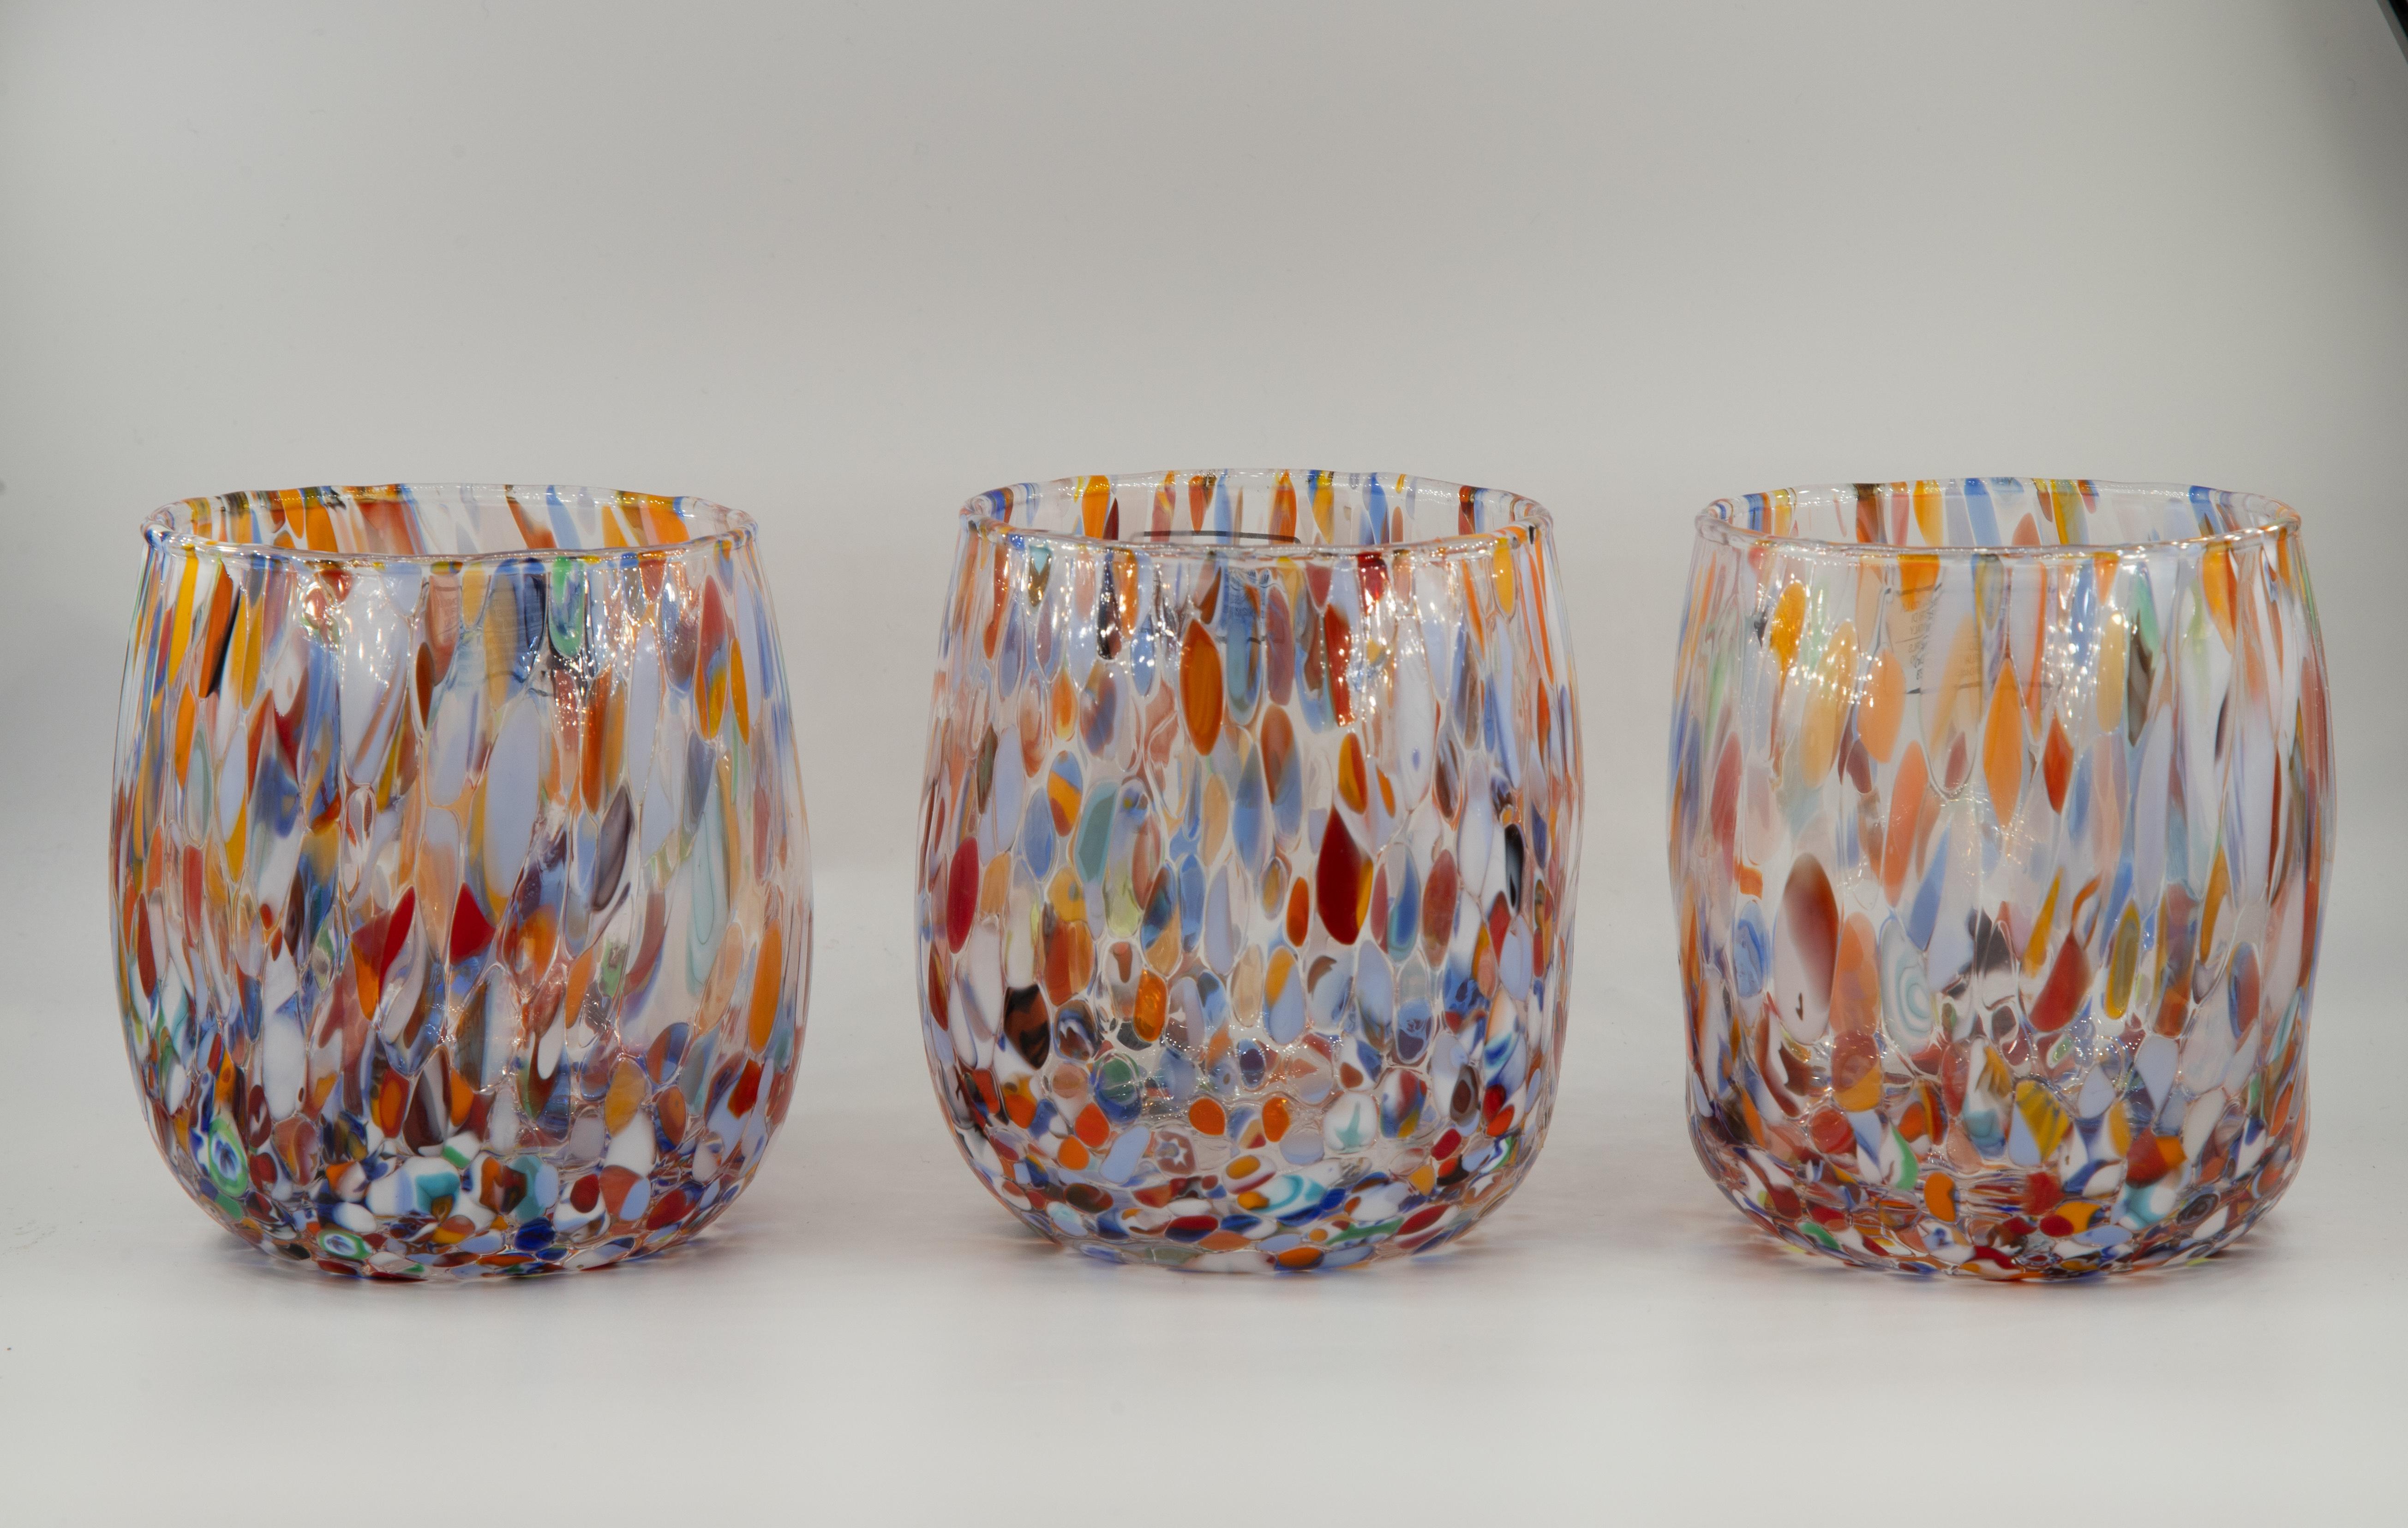 Set of six water/drink/wine glasses color Millefiori - Murano glass - Made in Italy.

These individual Murano glasses are inspired by the classic 